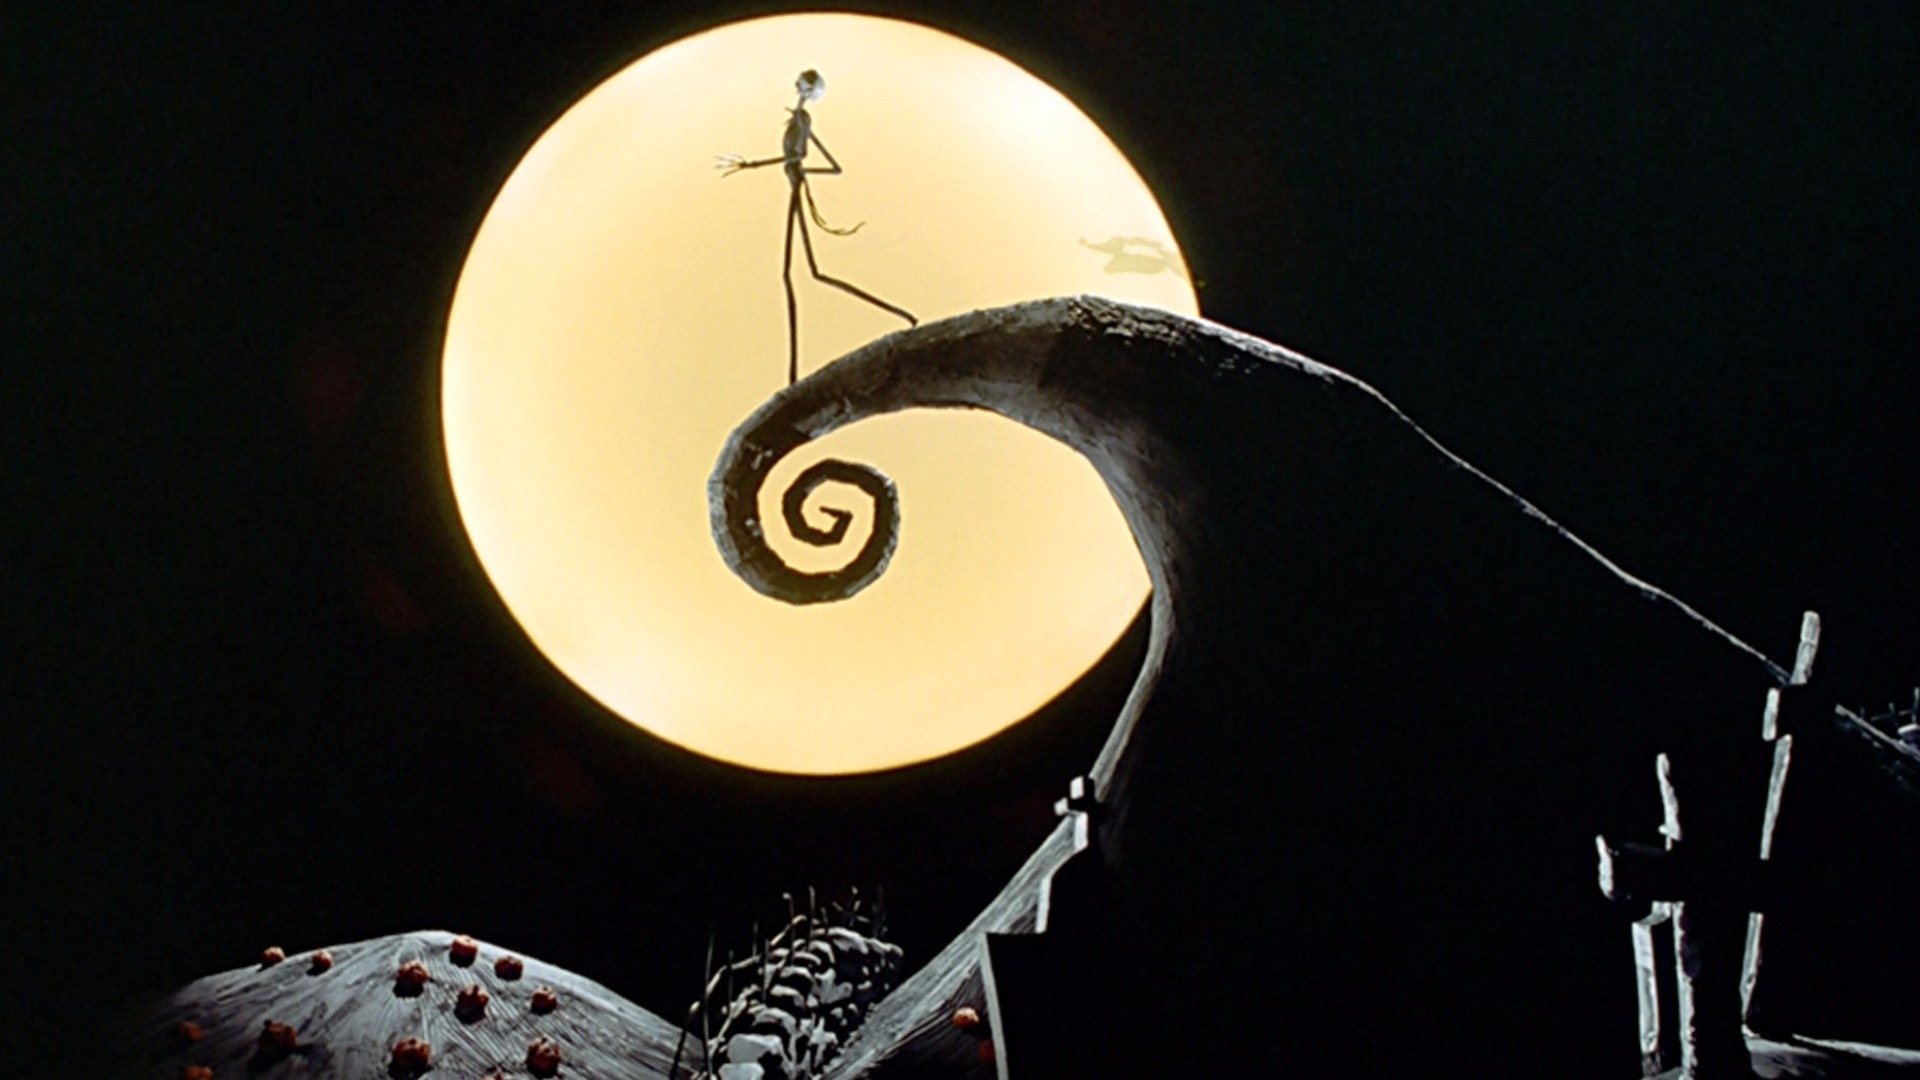 Henry Selick, Chris Sarandon Look Back on 'The Nightmare Before